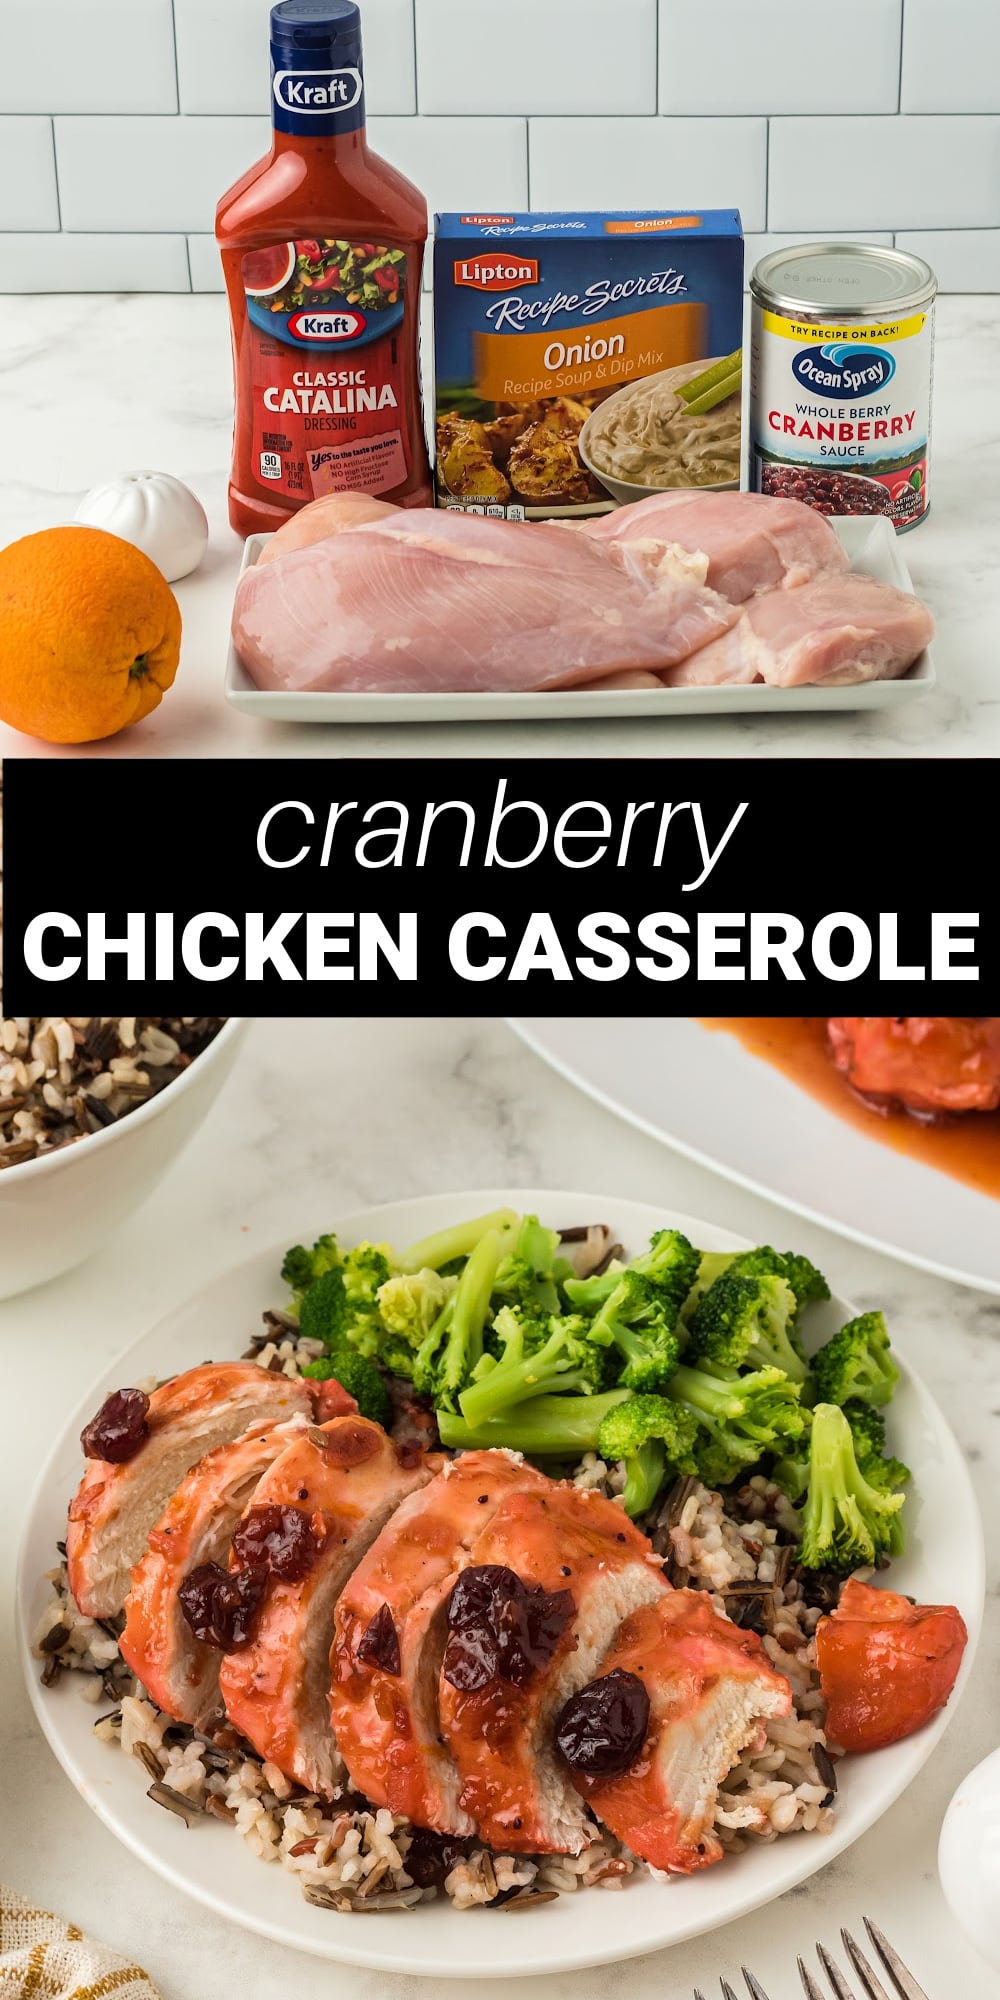 This cranberry chicken casserole is a delicious and easy dinner that’s perfect for those chilly fall and winter nights. Chicken breasts are topped with a sweet and tangy cranberry orange sauce and baked to tender and juicy perfection, then served over white or brown rice, for a hearty and flavorful meal that the entire family will love.